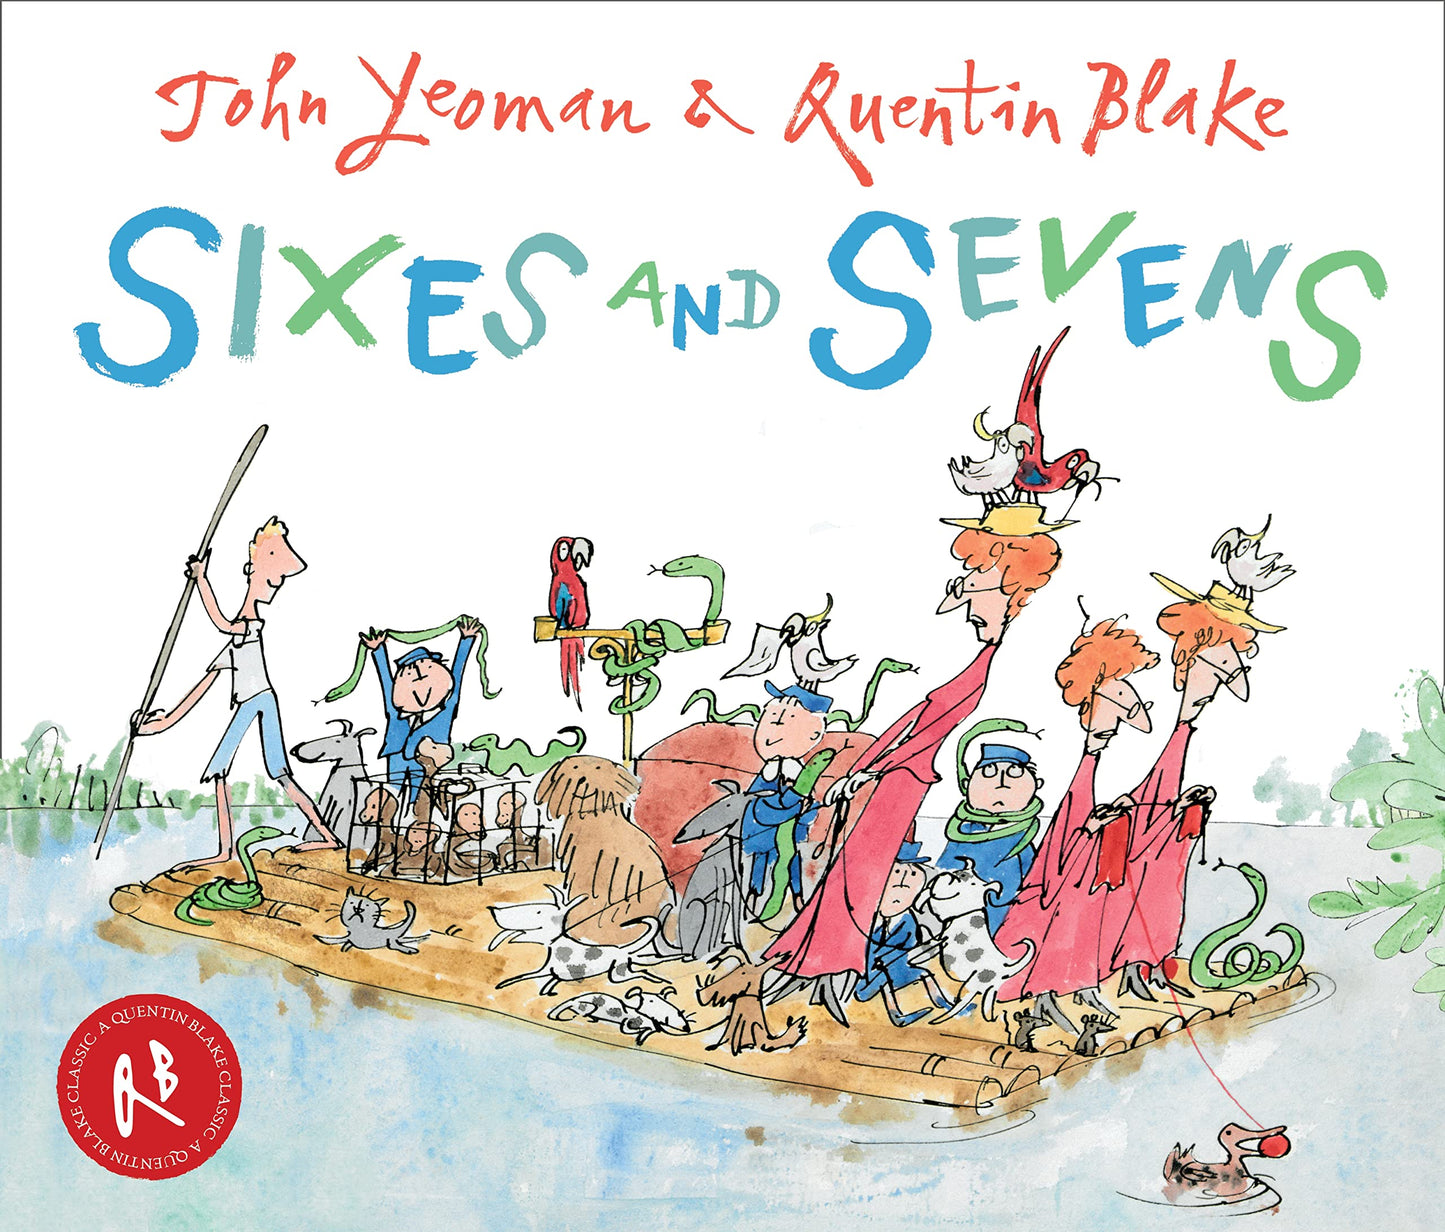 Sixes and Sevens by John Yeoman & Quentin Blake